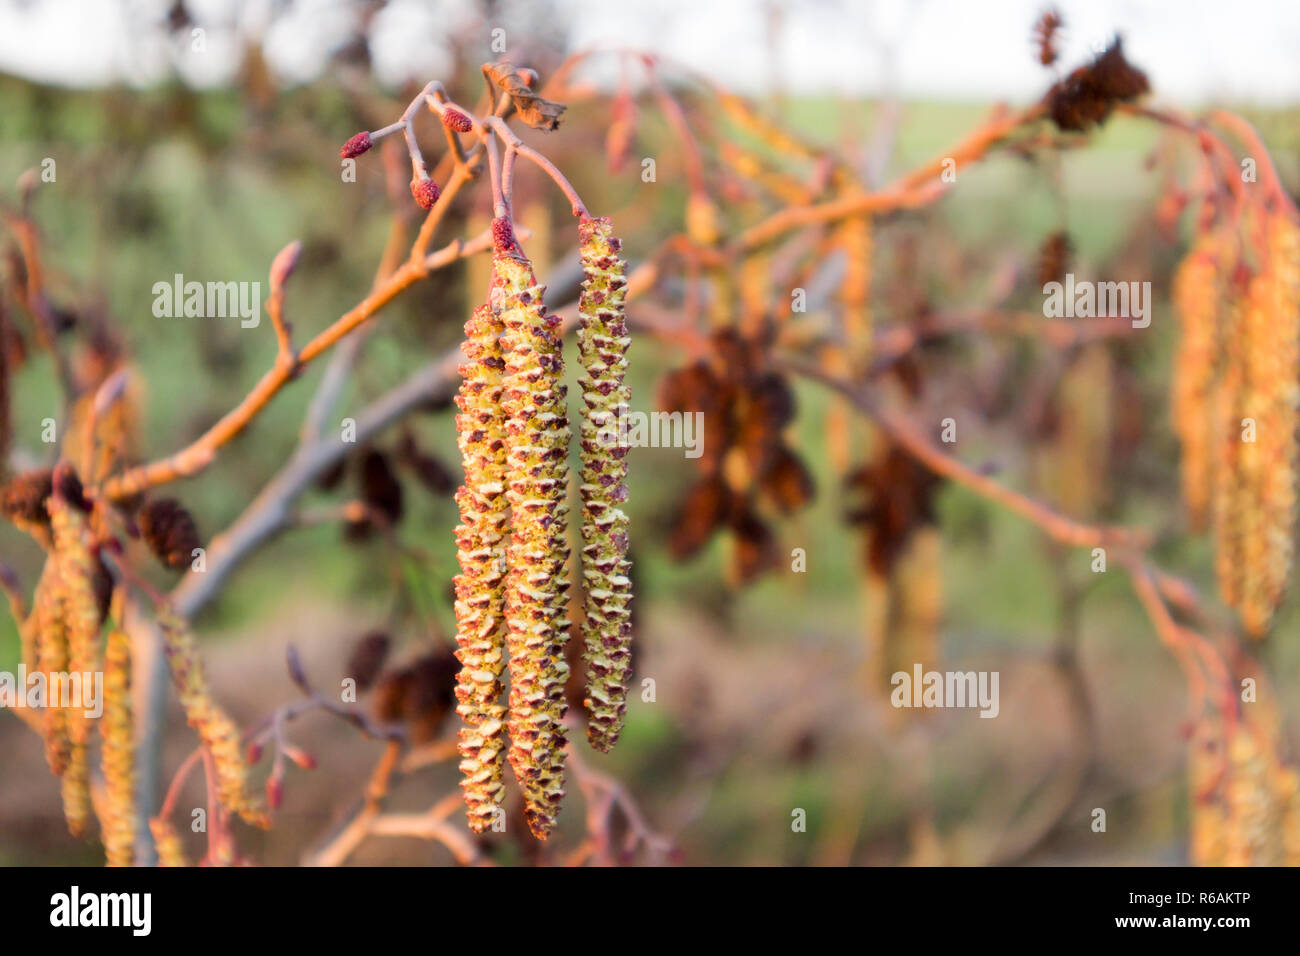 Black Alder With Male And Female Blossoms Stock Photo